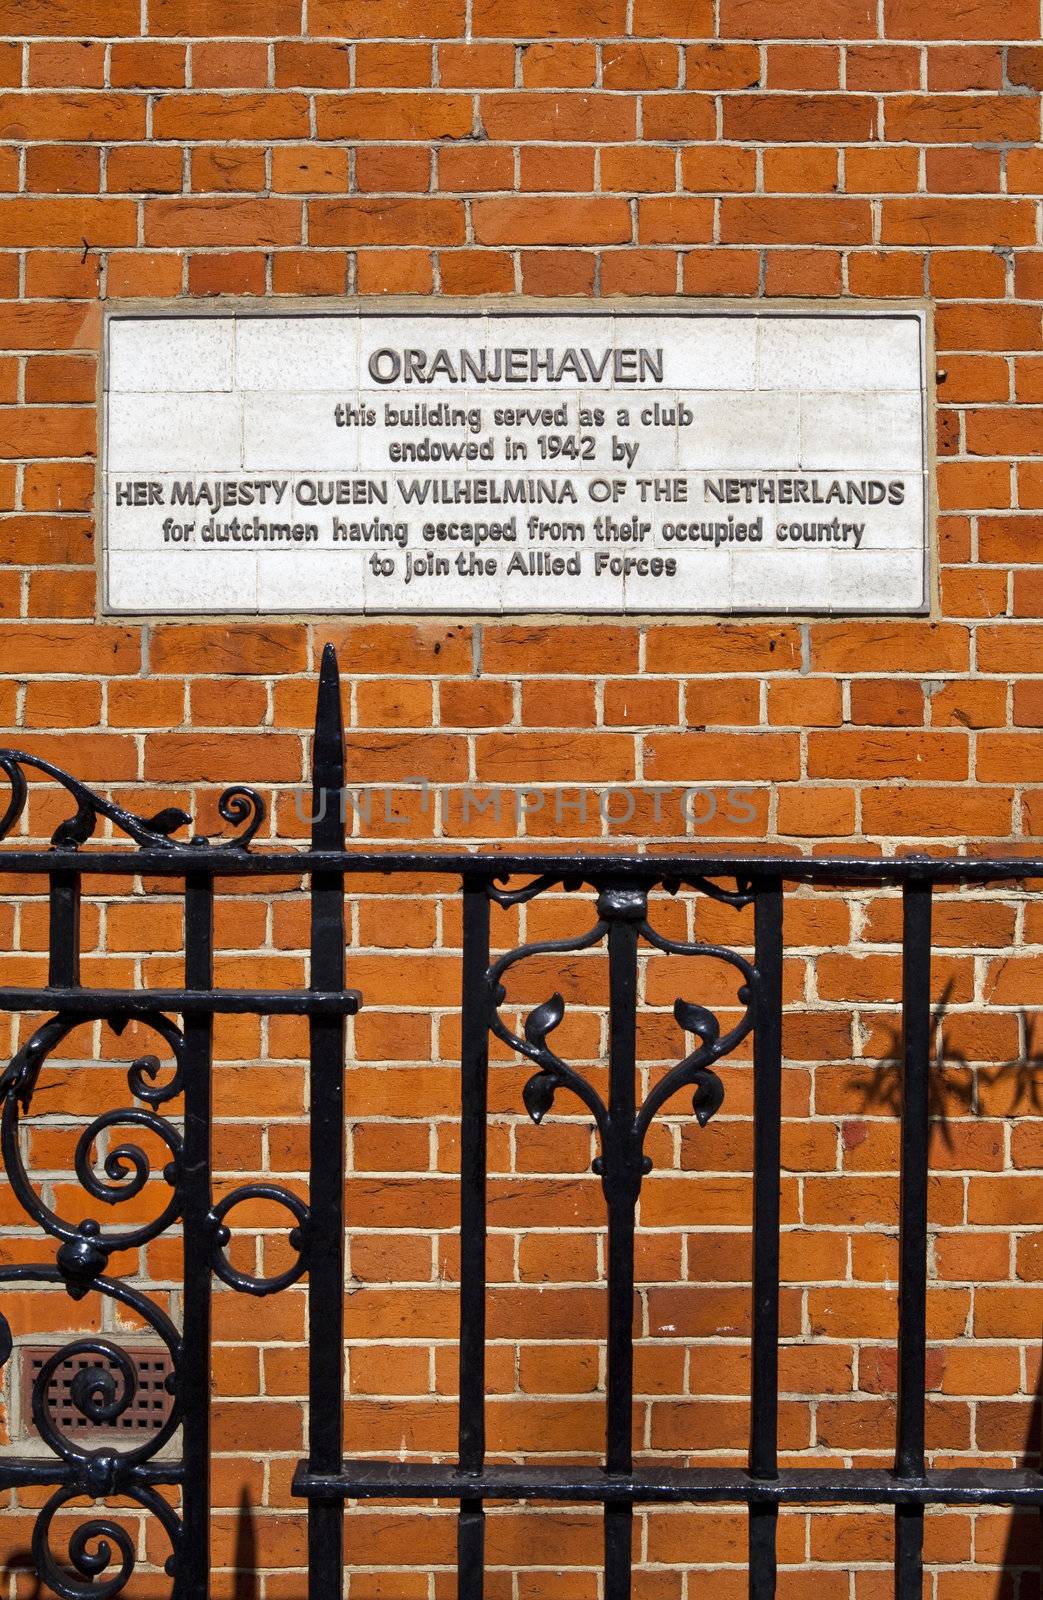 Plaque in Hyde Park Place marking the site of 'Oranjehaven' - a club during the Second World War used by dutch people who fled Nazi Germany and joined the Allied forces.